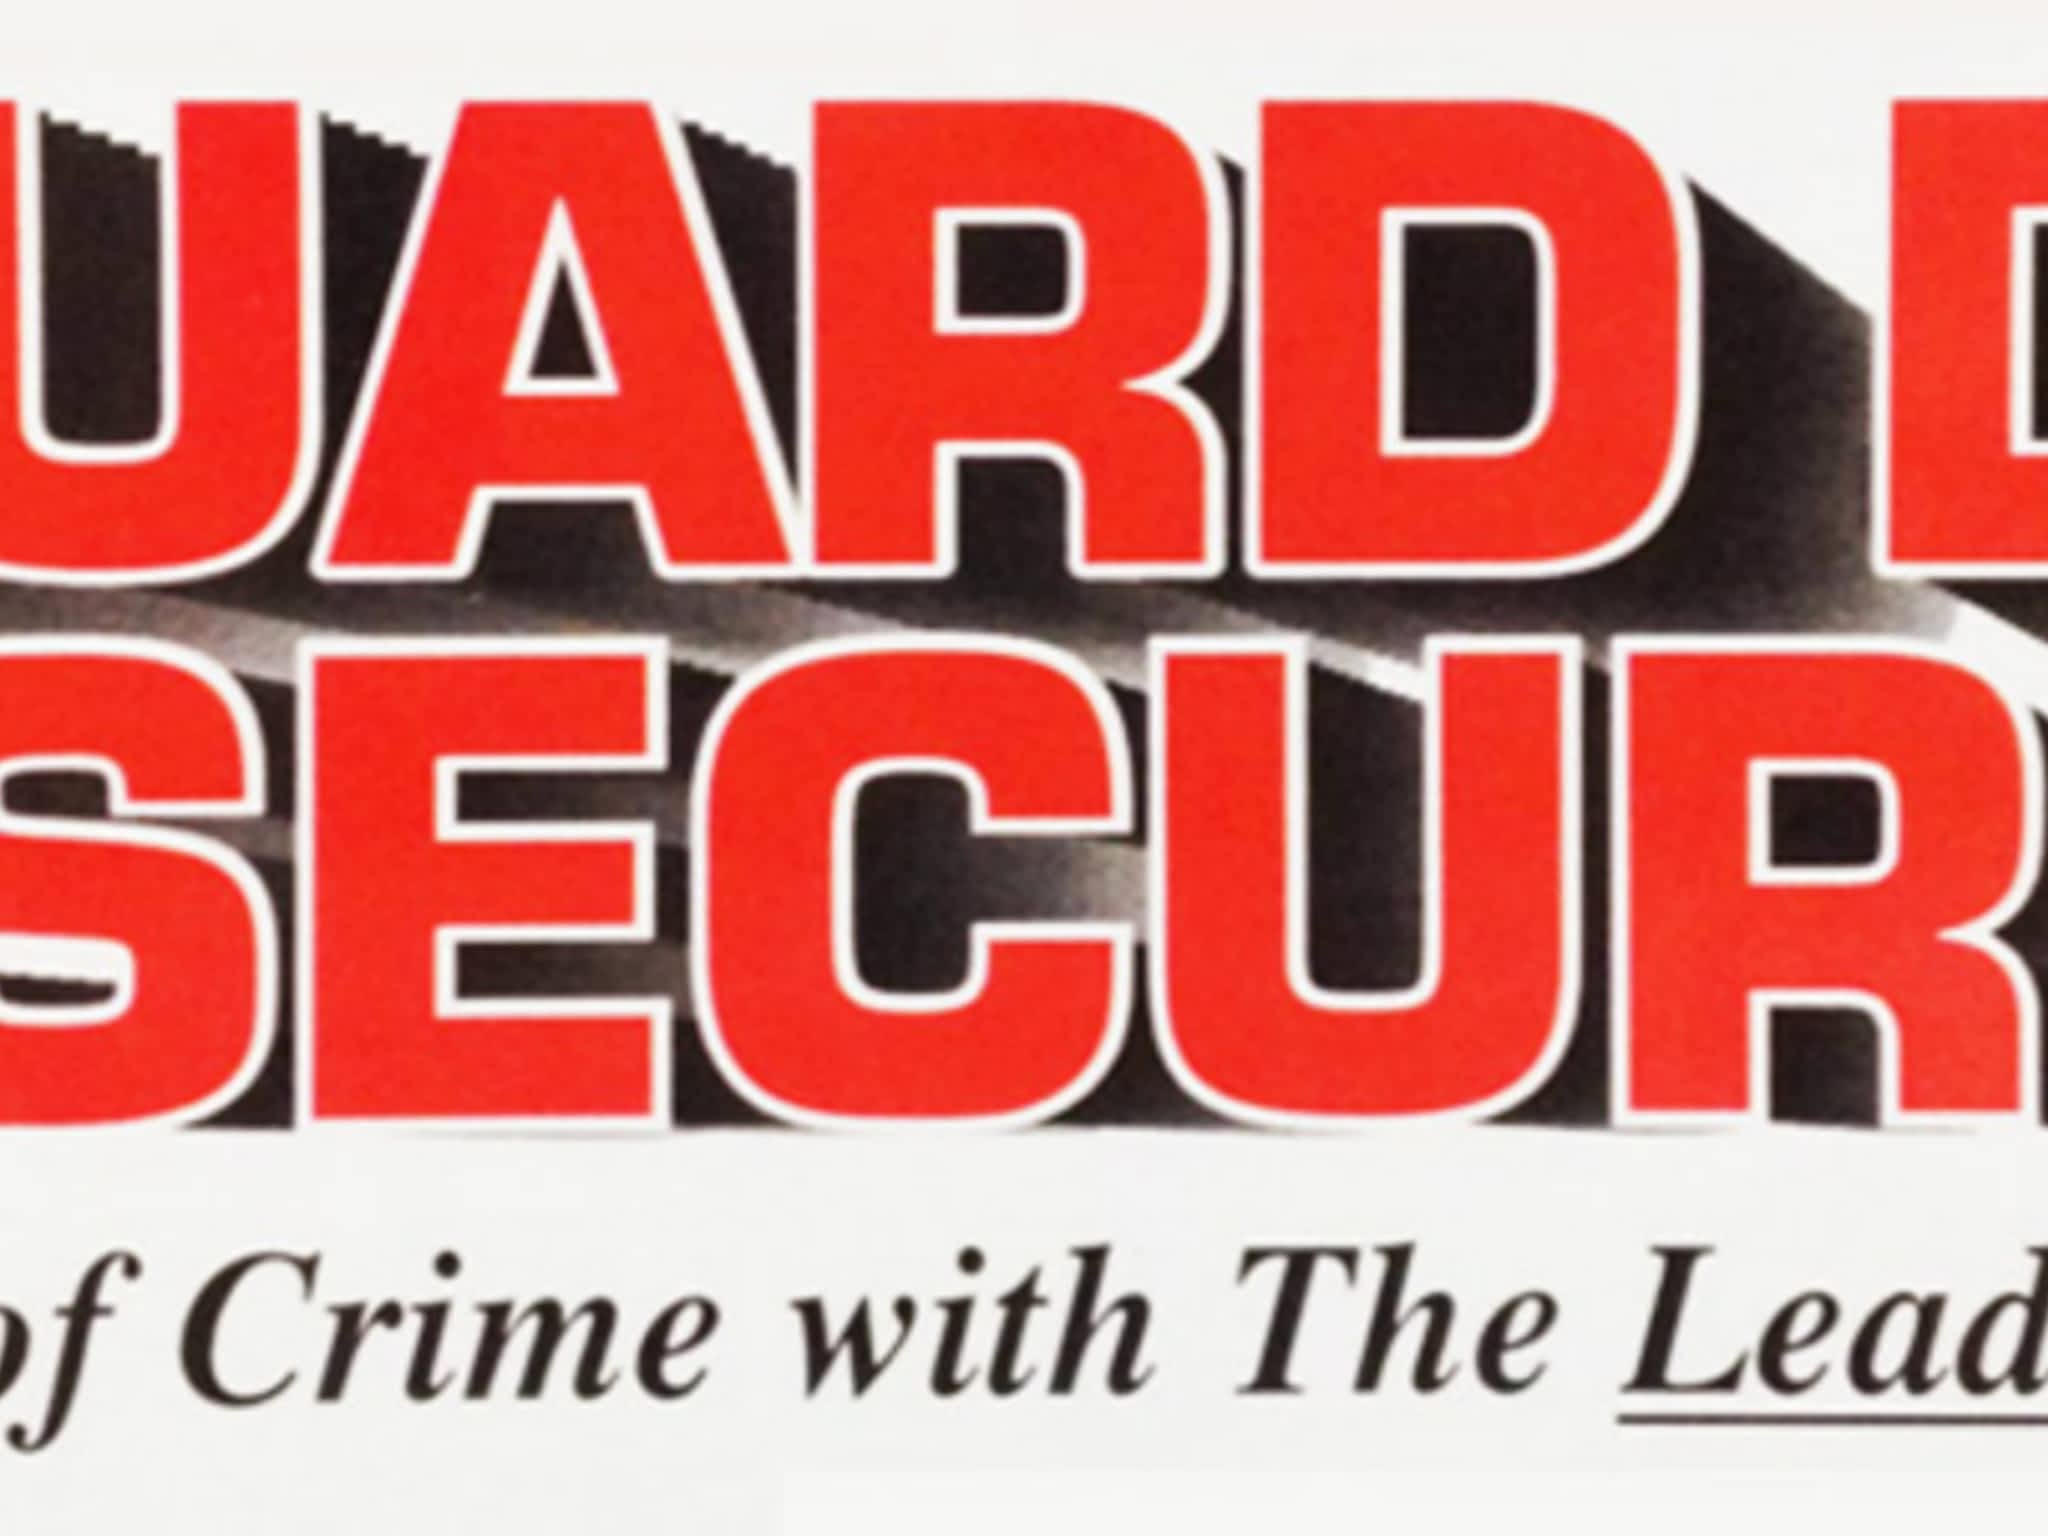 photo Academy of Guard Dog Security Services Ltd